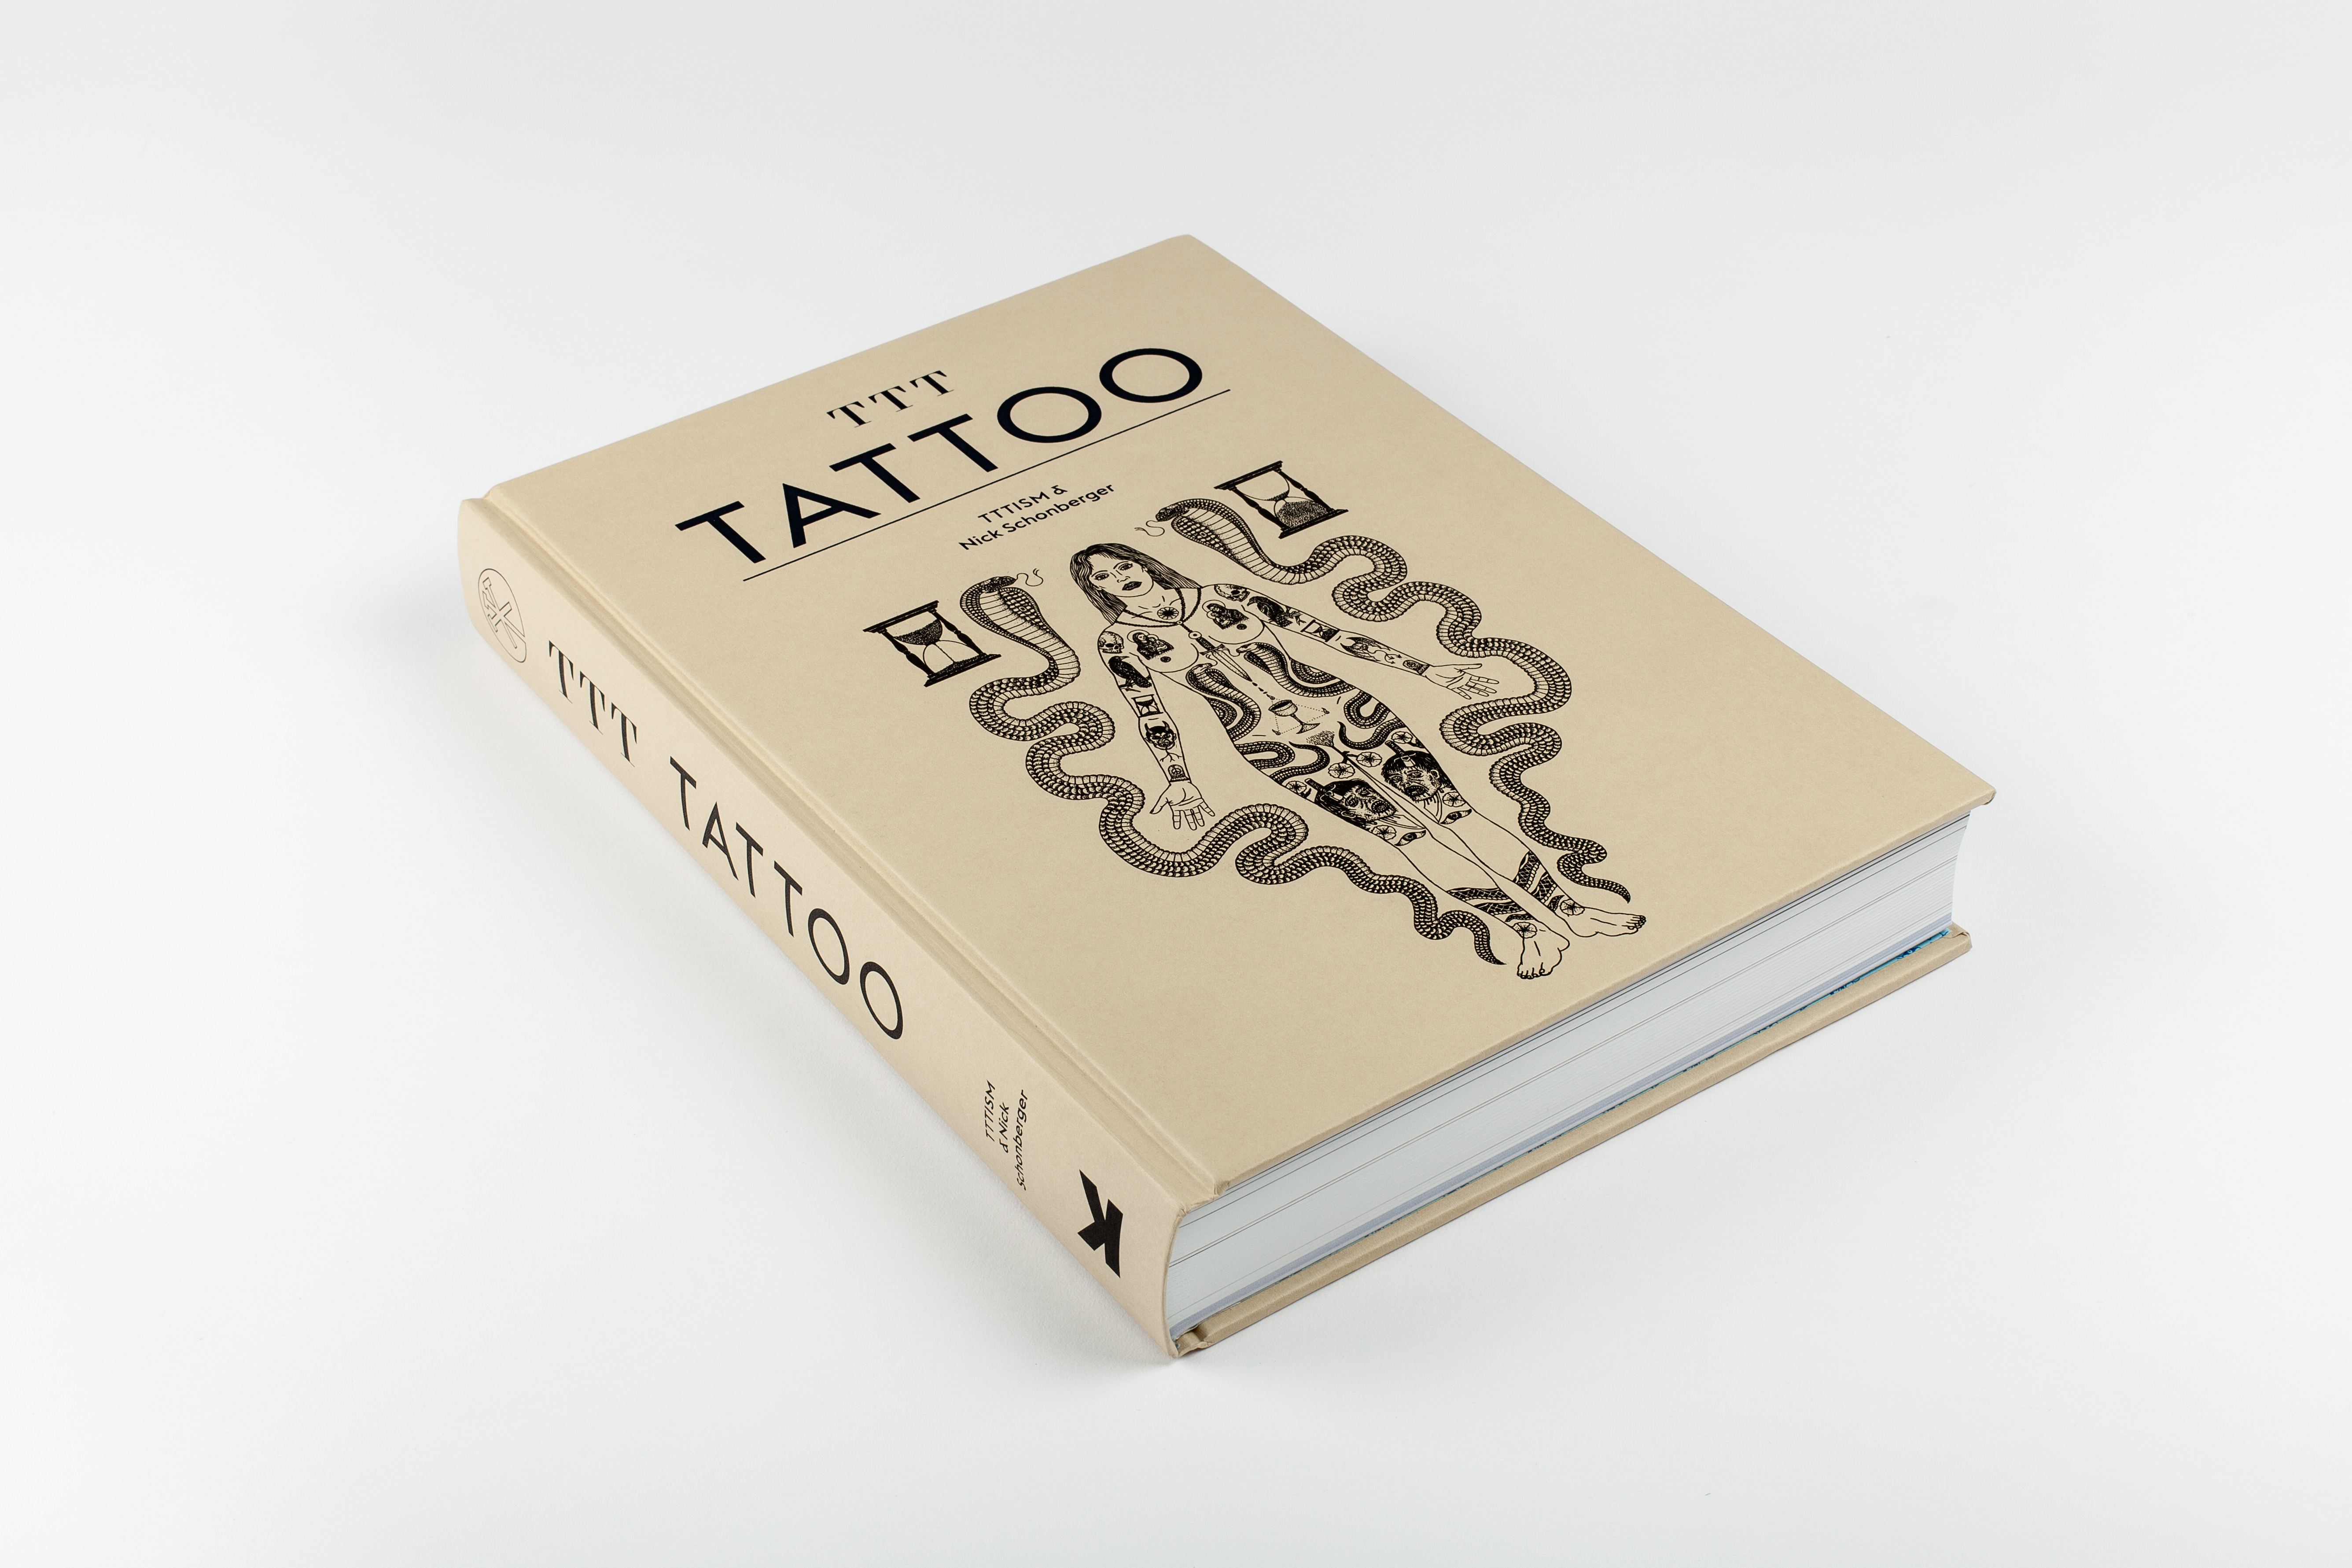 From TTT:Tattoo. Courtesy of Laurence King Publishing.